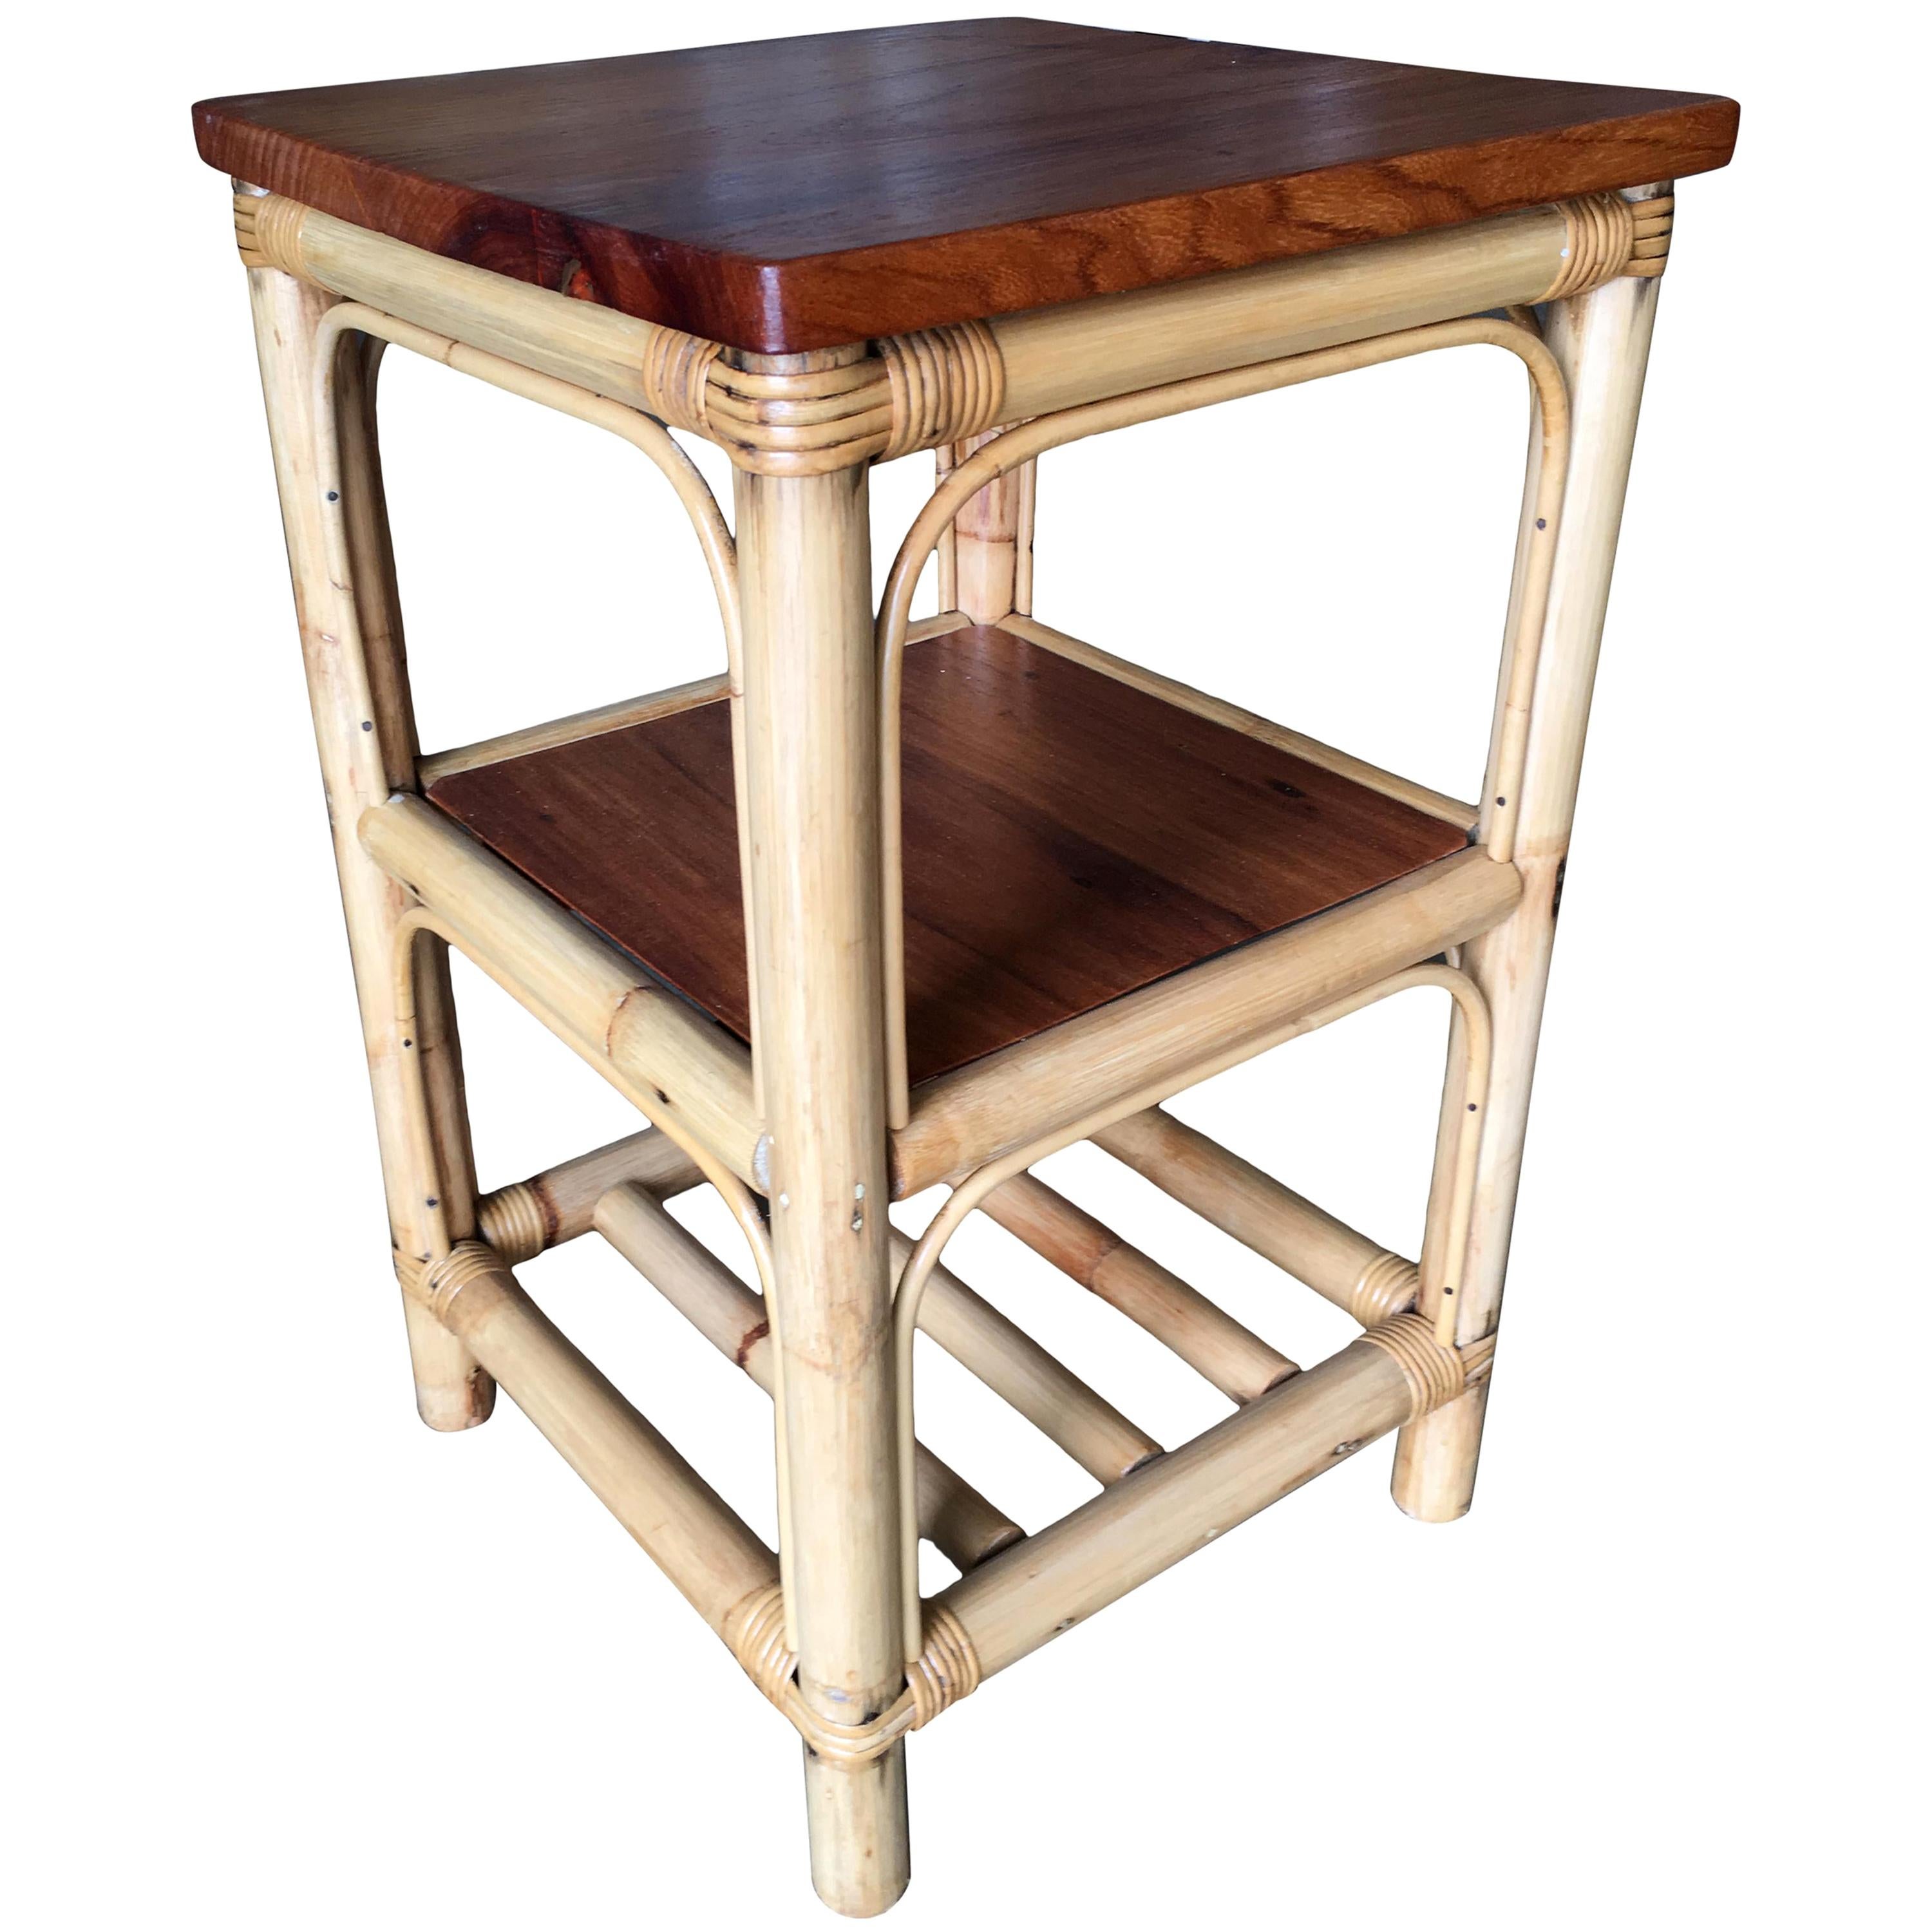 Restored Rattan Square Side Table with Acacia Koa Wood Top 